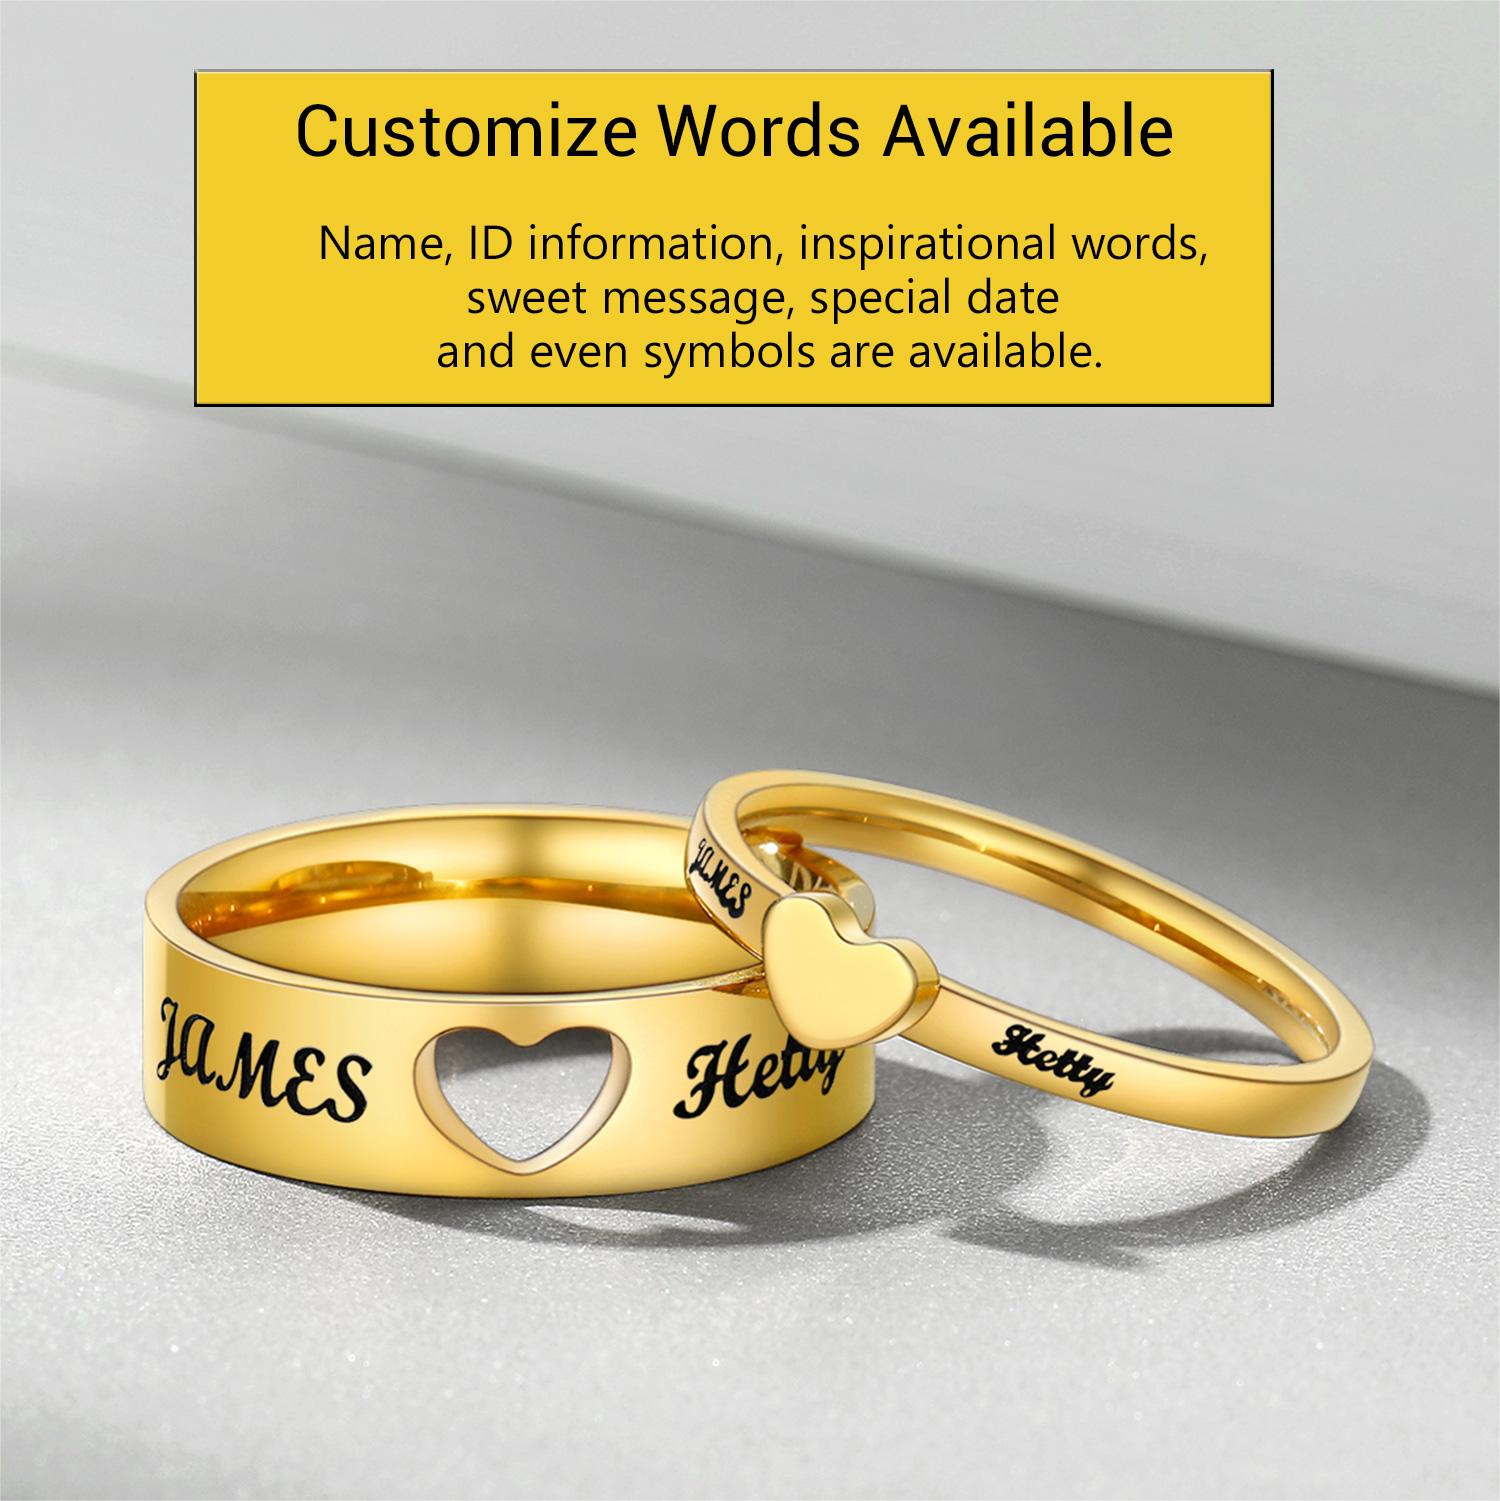 Customized Couples Rings, Personalized Rings, Stamped Rings, Engraved  Personalized Couples Ring, Name Ring, Couple Ring Set - Etsy